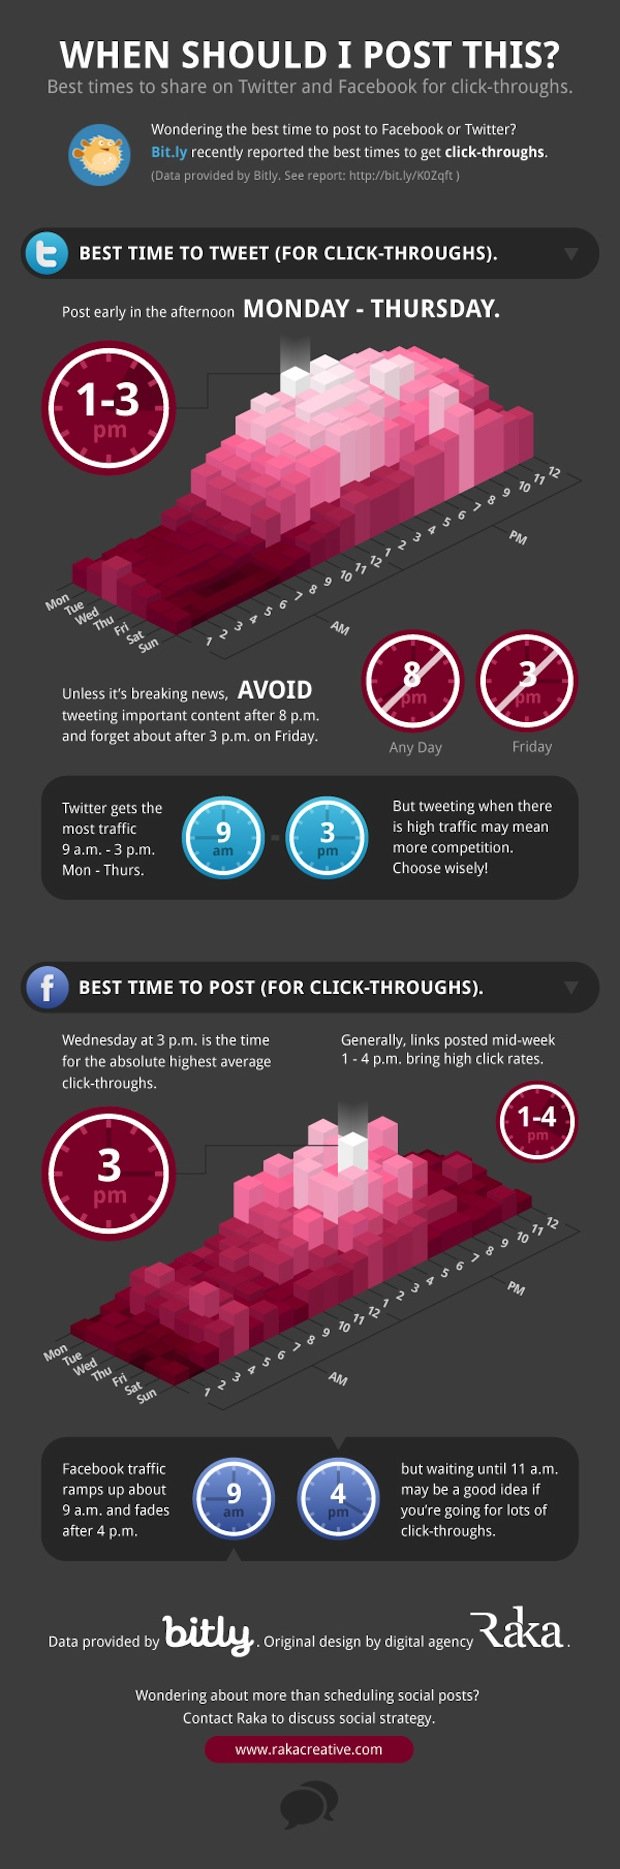 When’s the Best Time to Tweet and Post to Facebook? [Infographic]